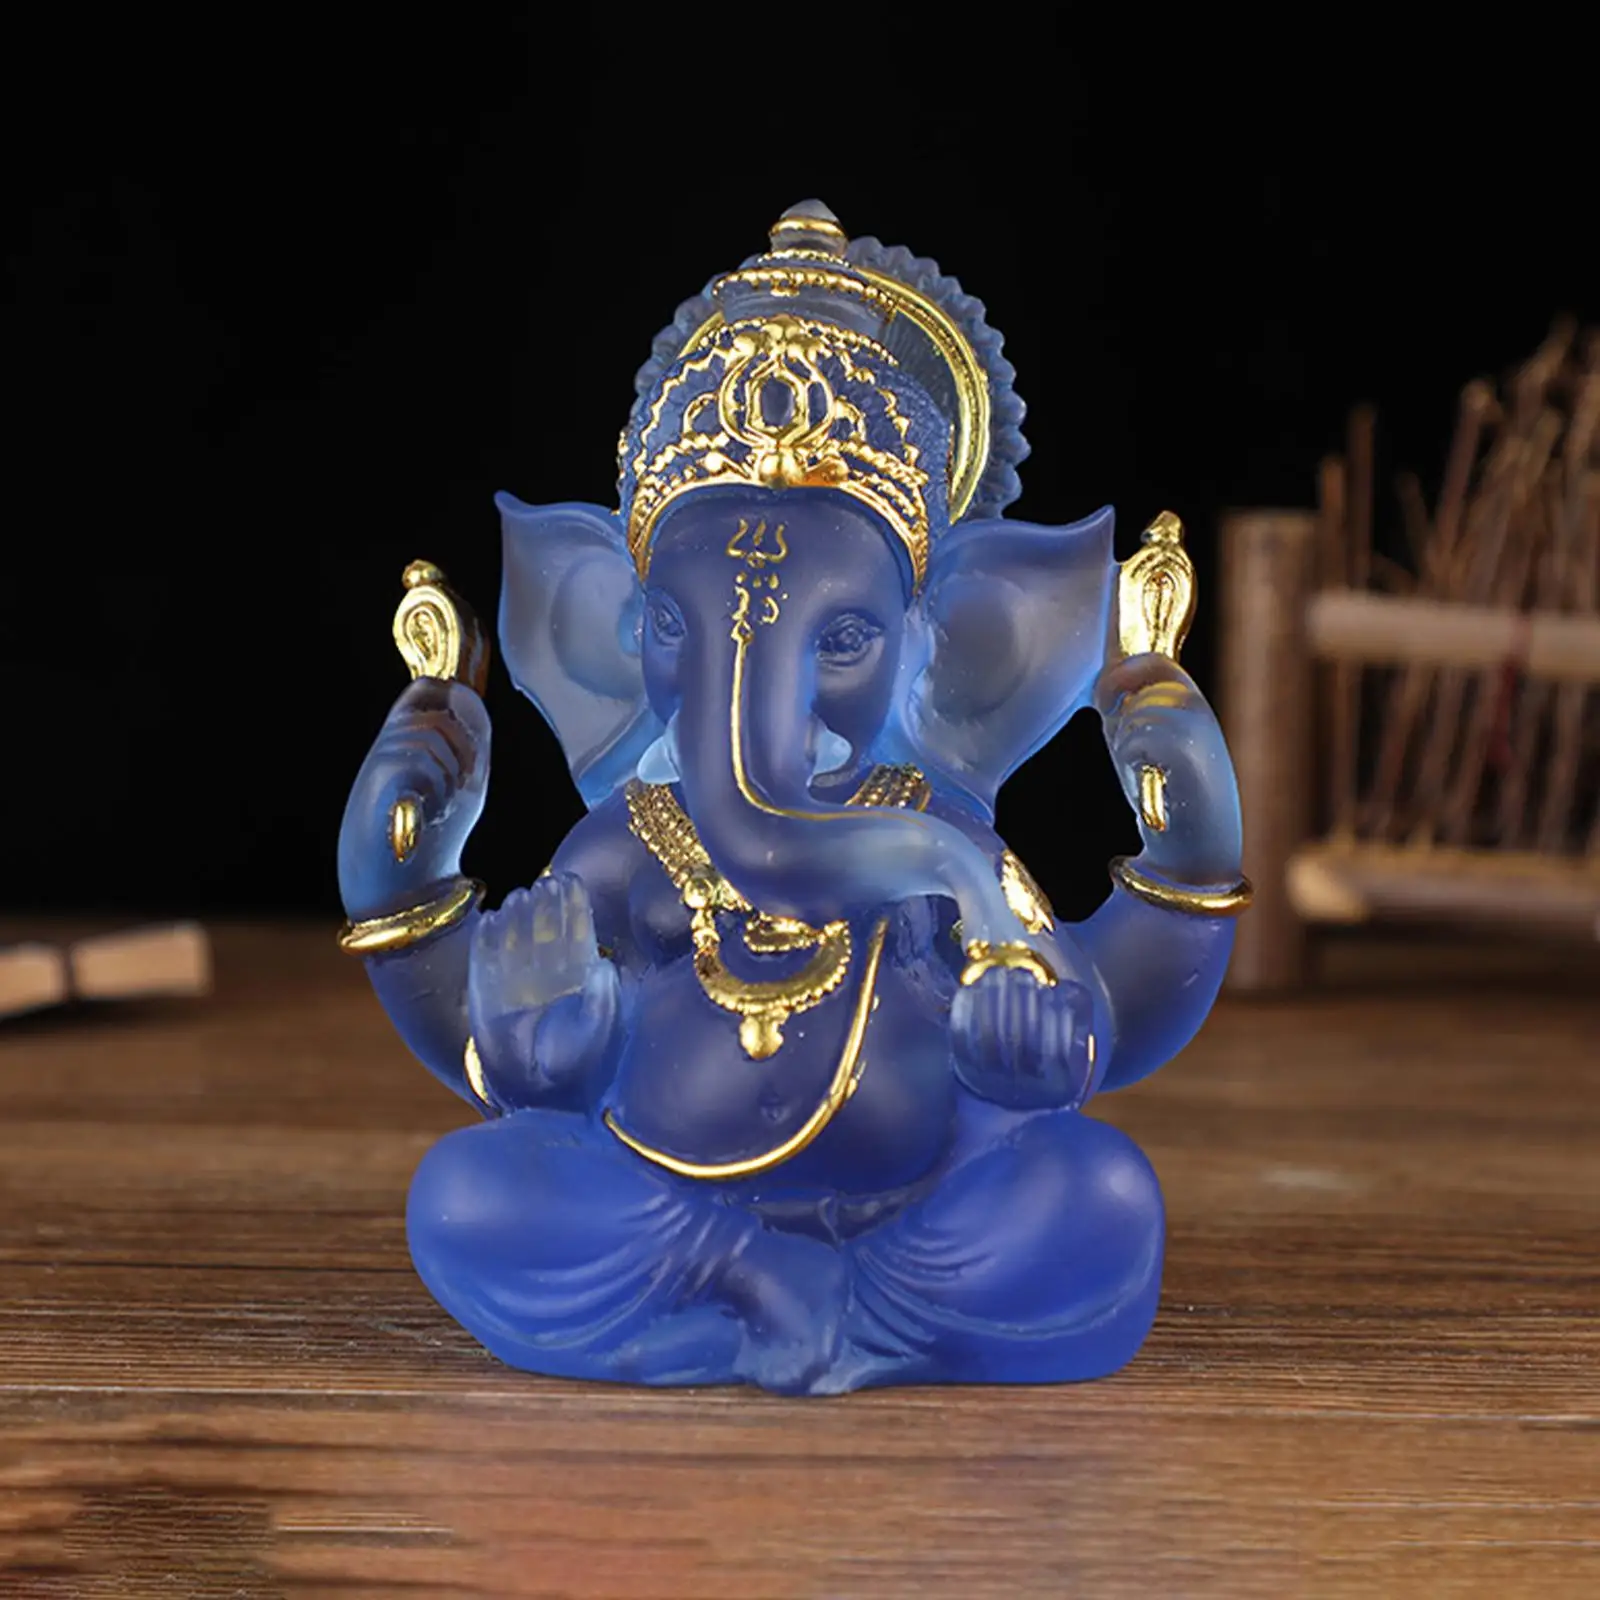   God Statues- Resin India  Sculpture Fengshui Lucky Wealth Hindu Buddha Figurine Ornament for Office Car Home Decor Crafts